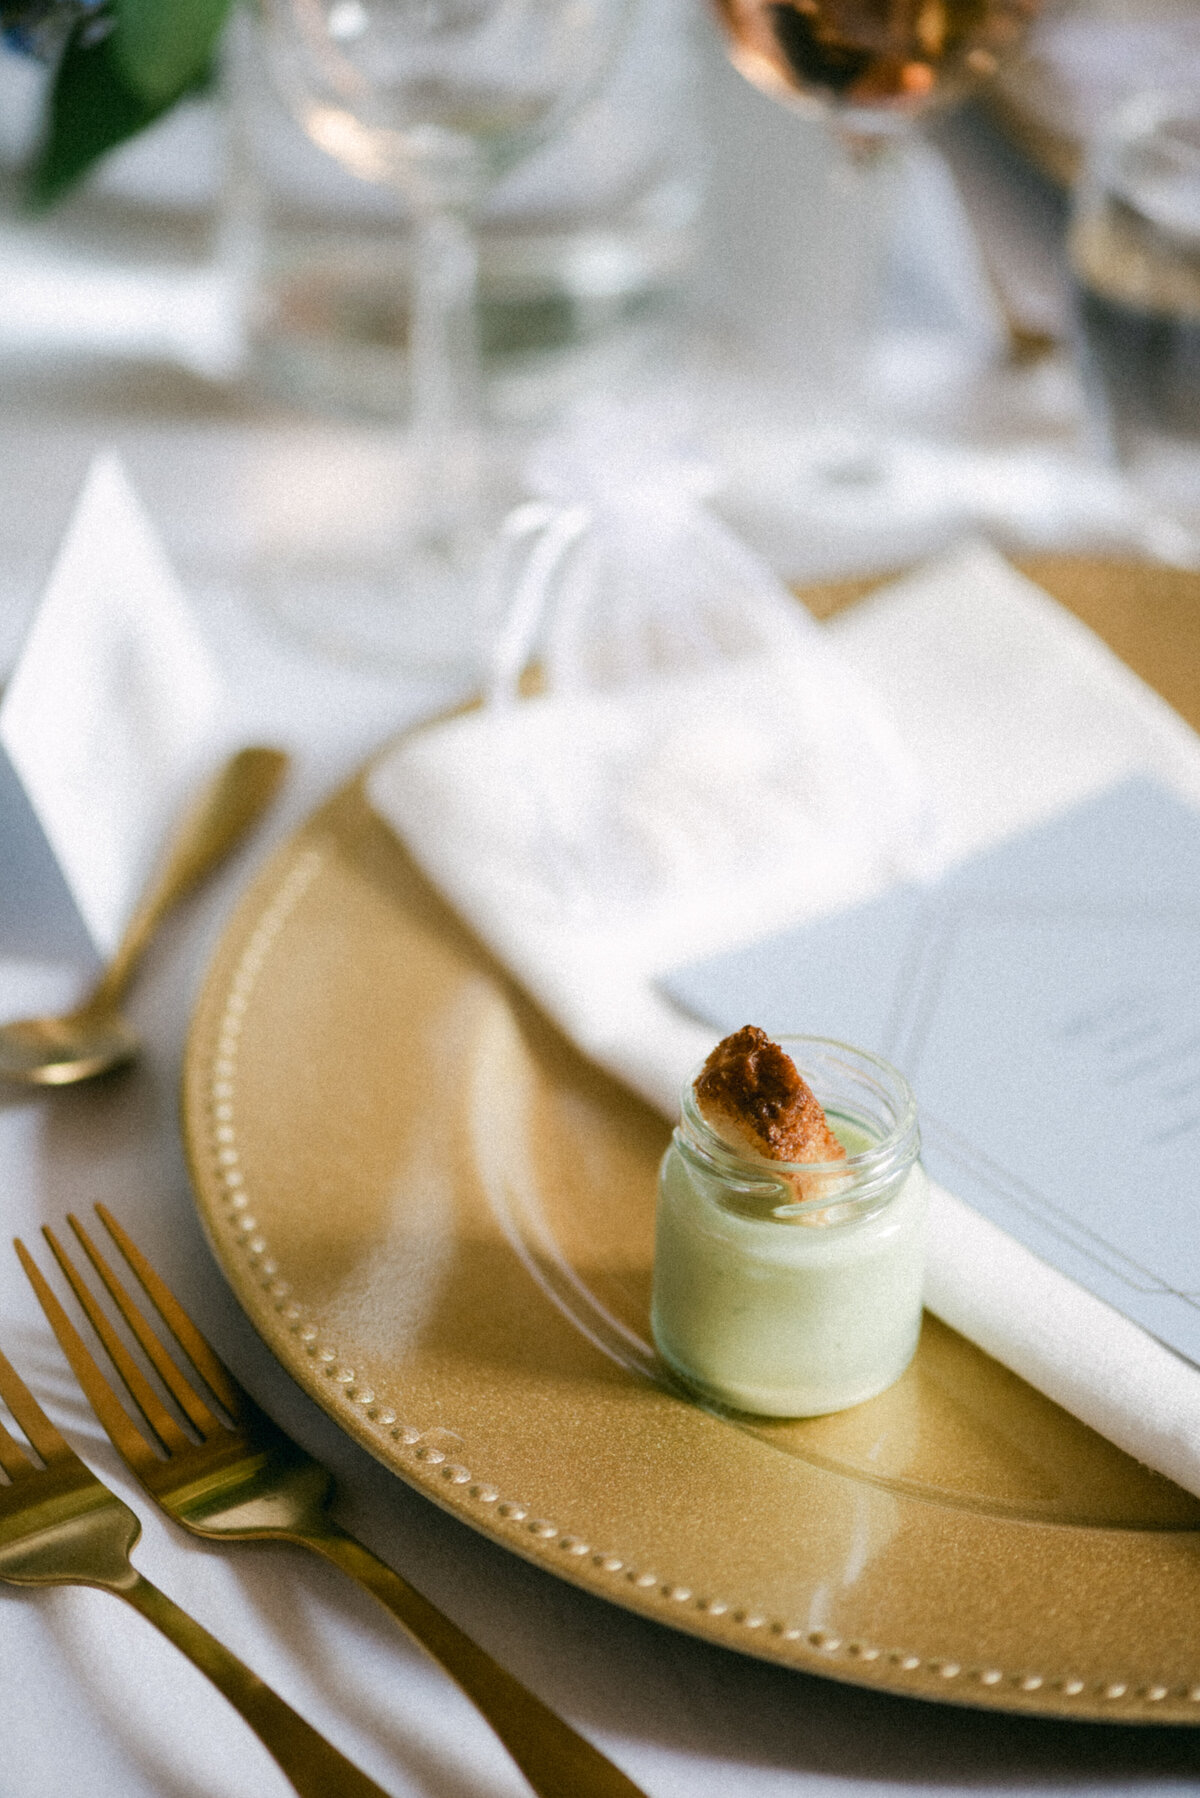 Wedding dinner in an image photographed by wedding photographer Hannika Gabrielsson.